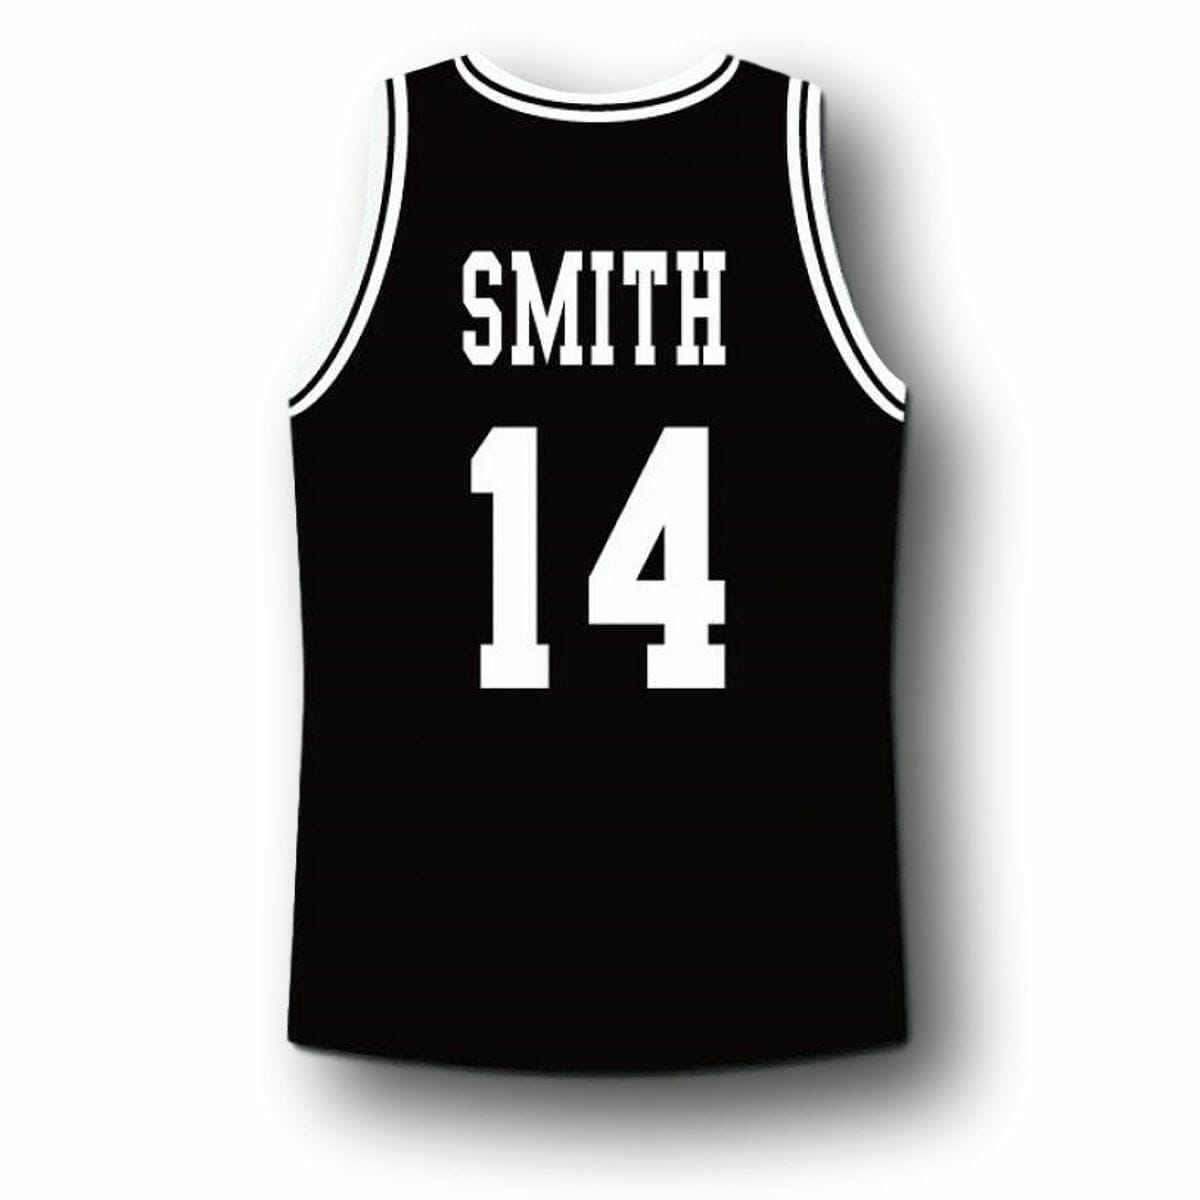 New Mikey Williams #1 High School Academy Basketball Jersey Sewn White Black